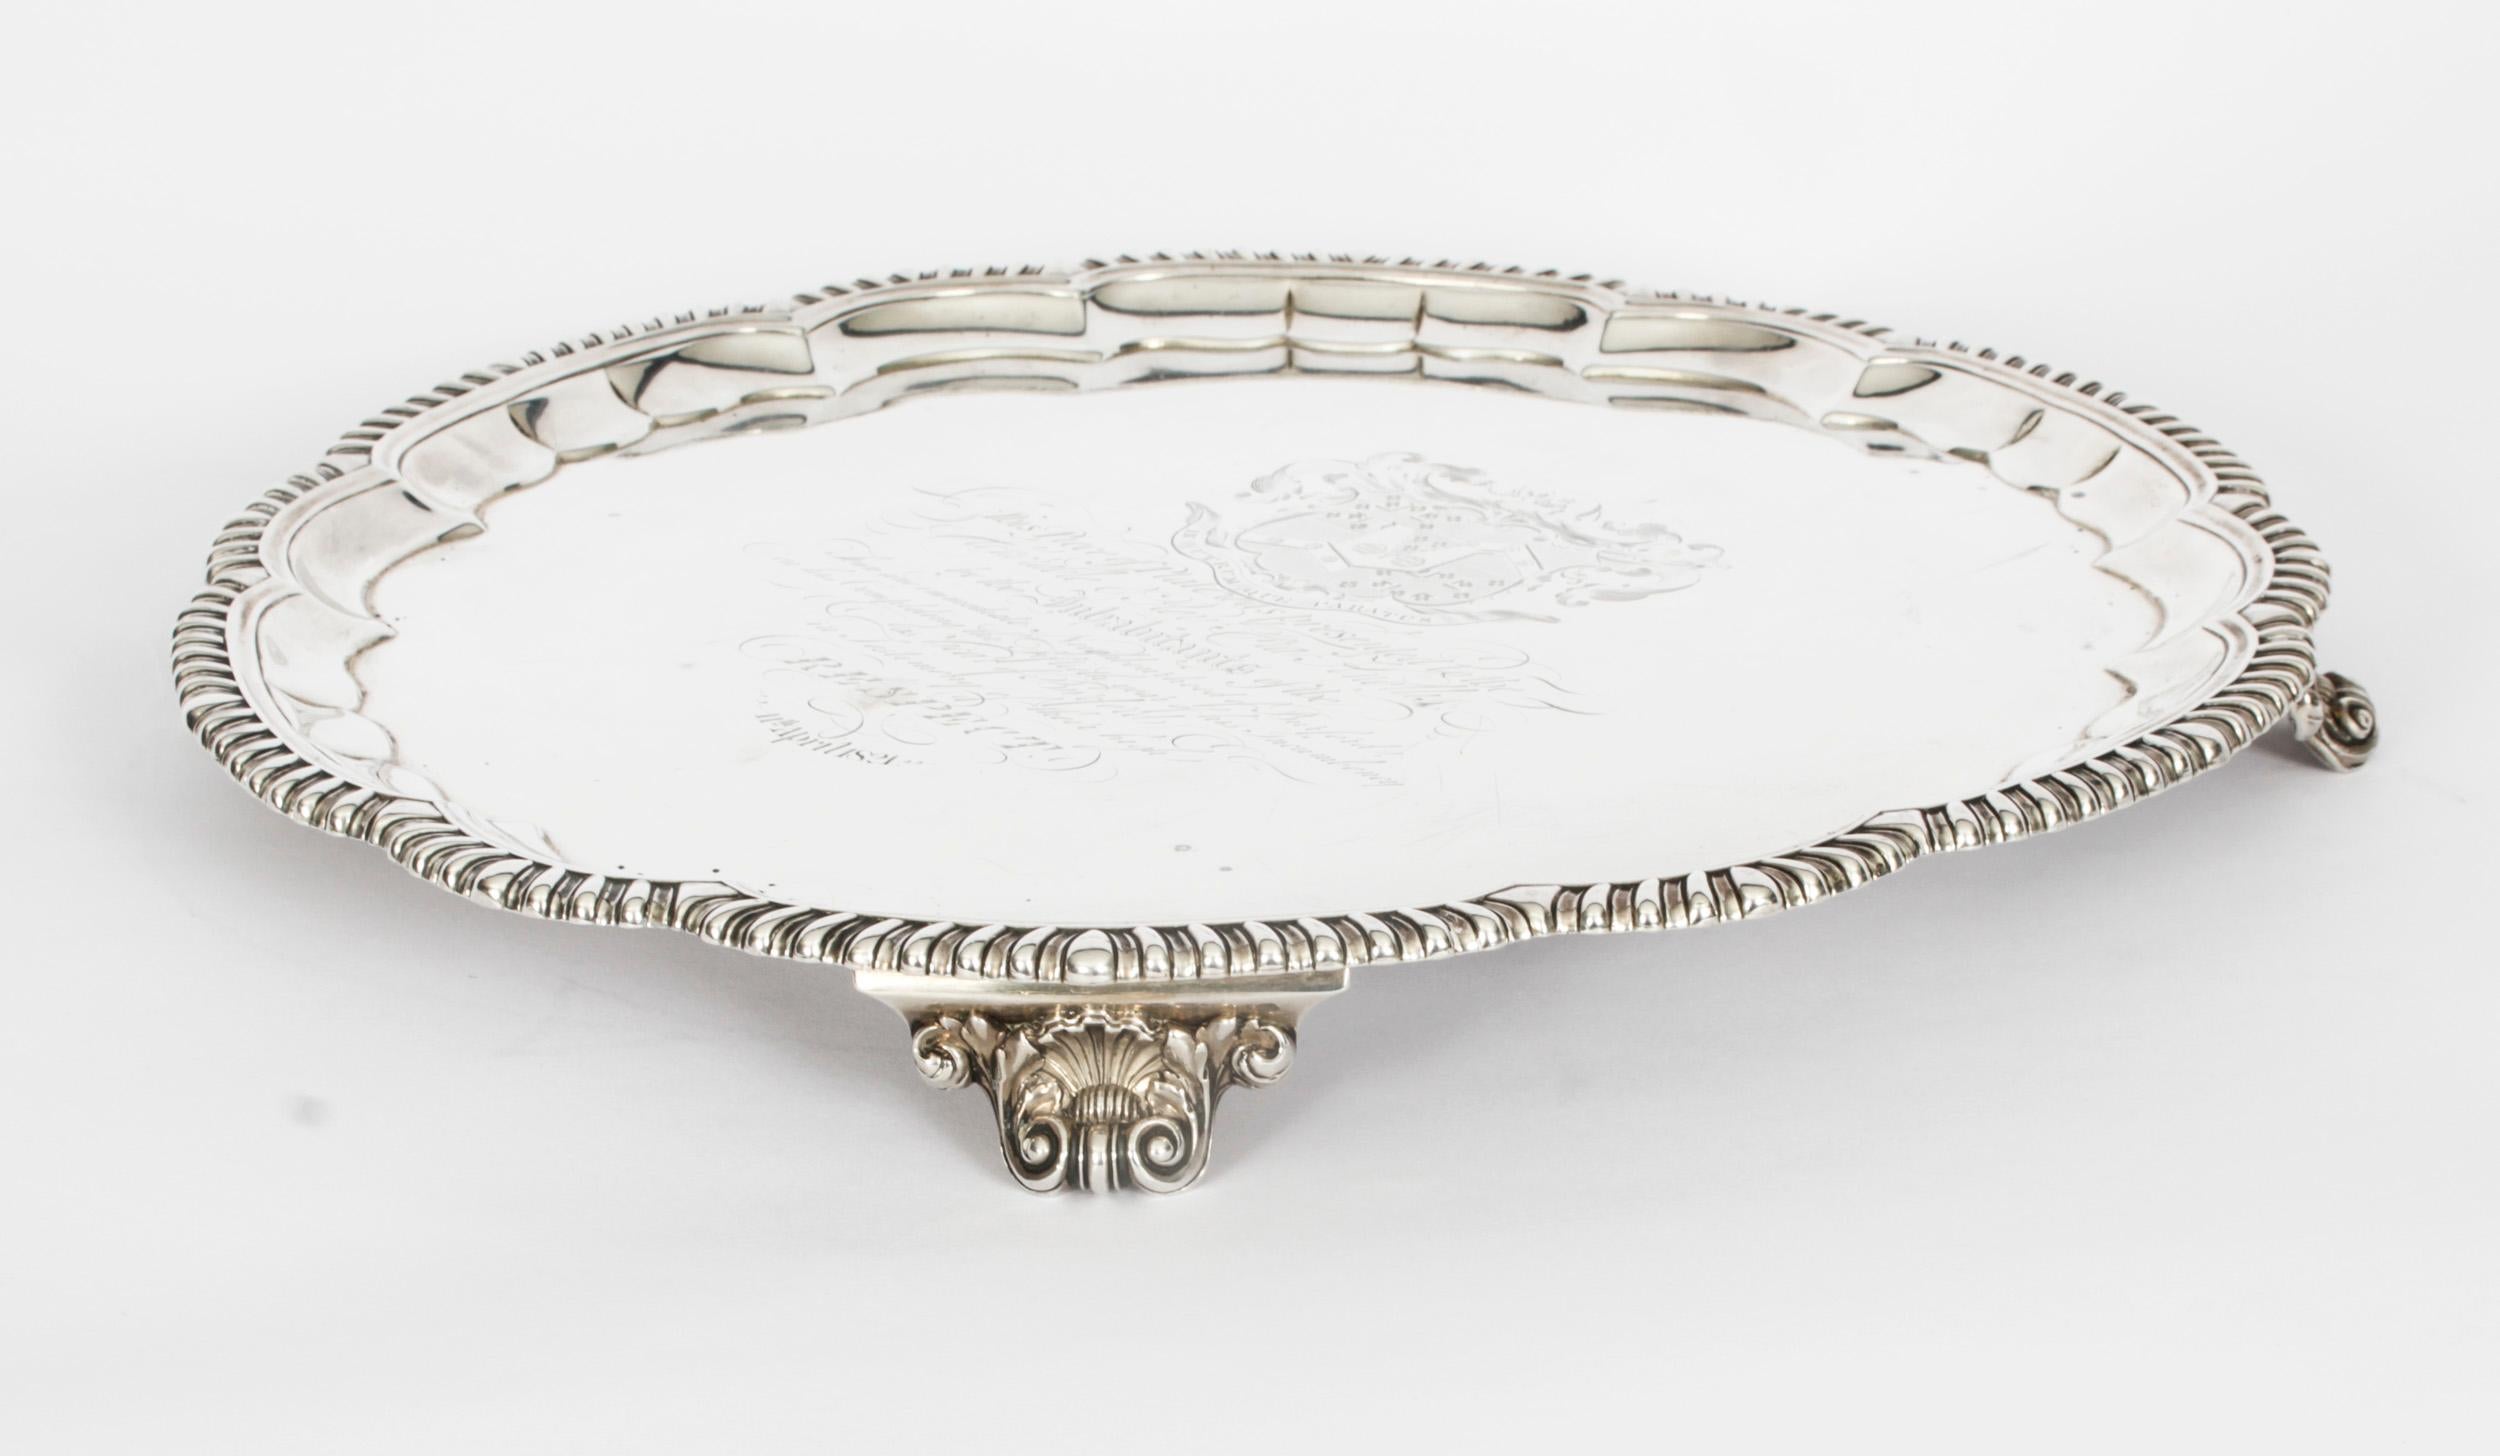 Early 19th Century Antique Large William IV Silver Tray Salver by Paul Storr 1820 19th Century For Sale